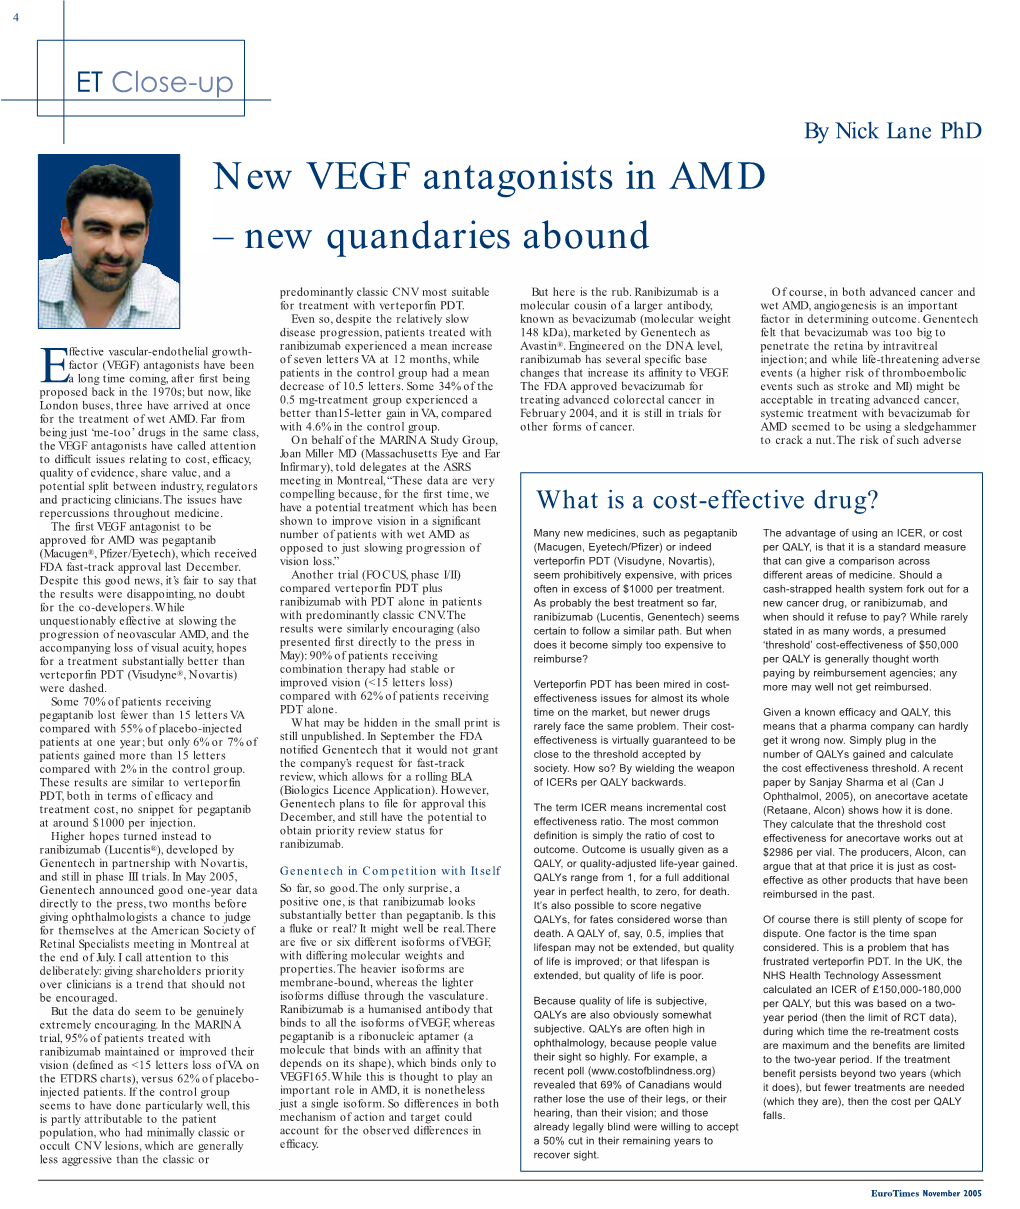 New VEGF Antagonists in AMD – New Quandaries Abound